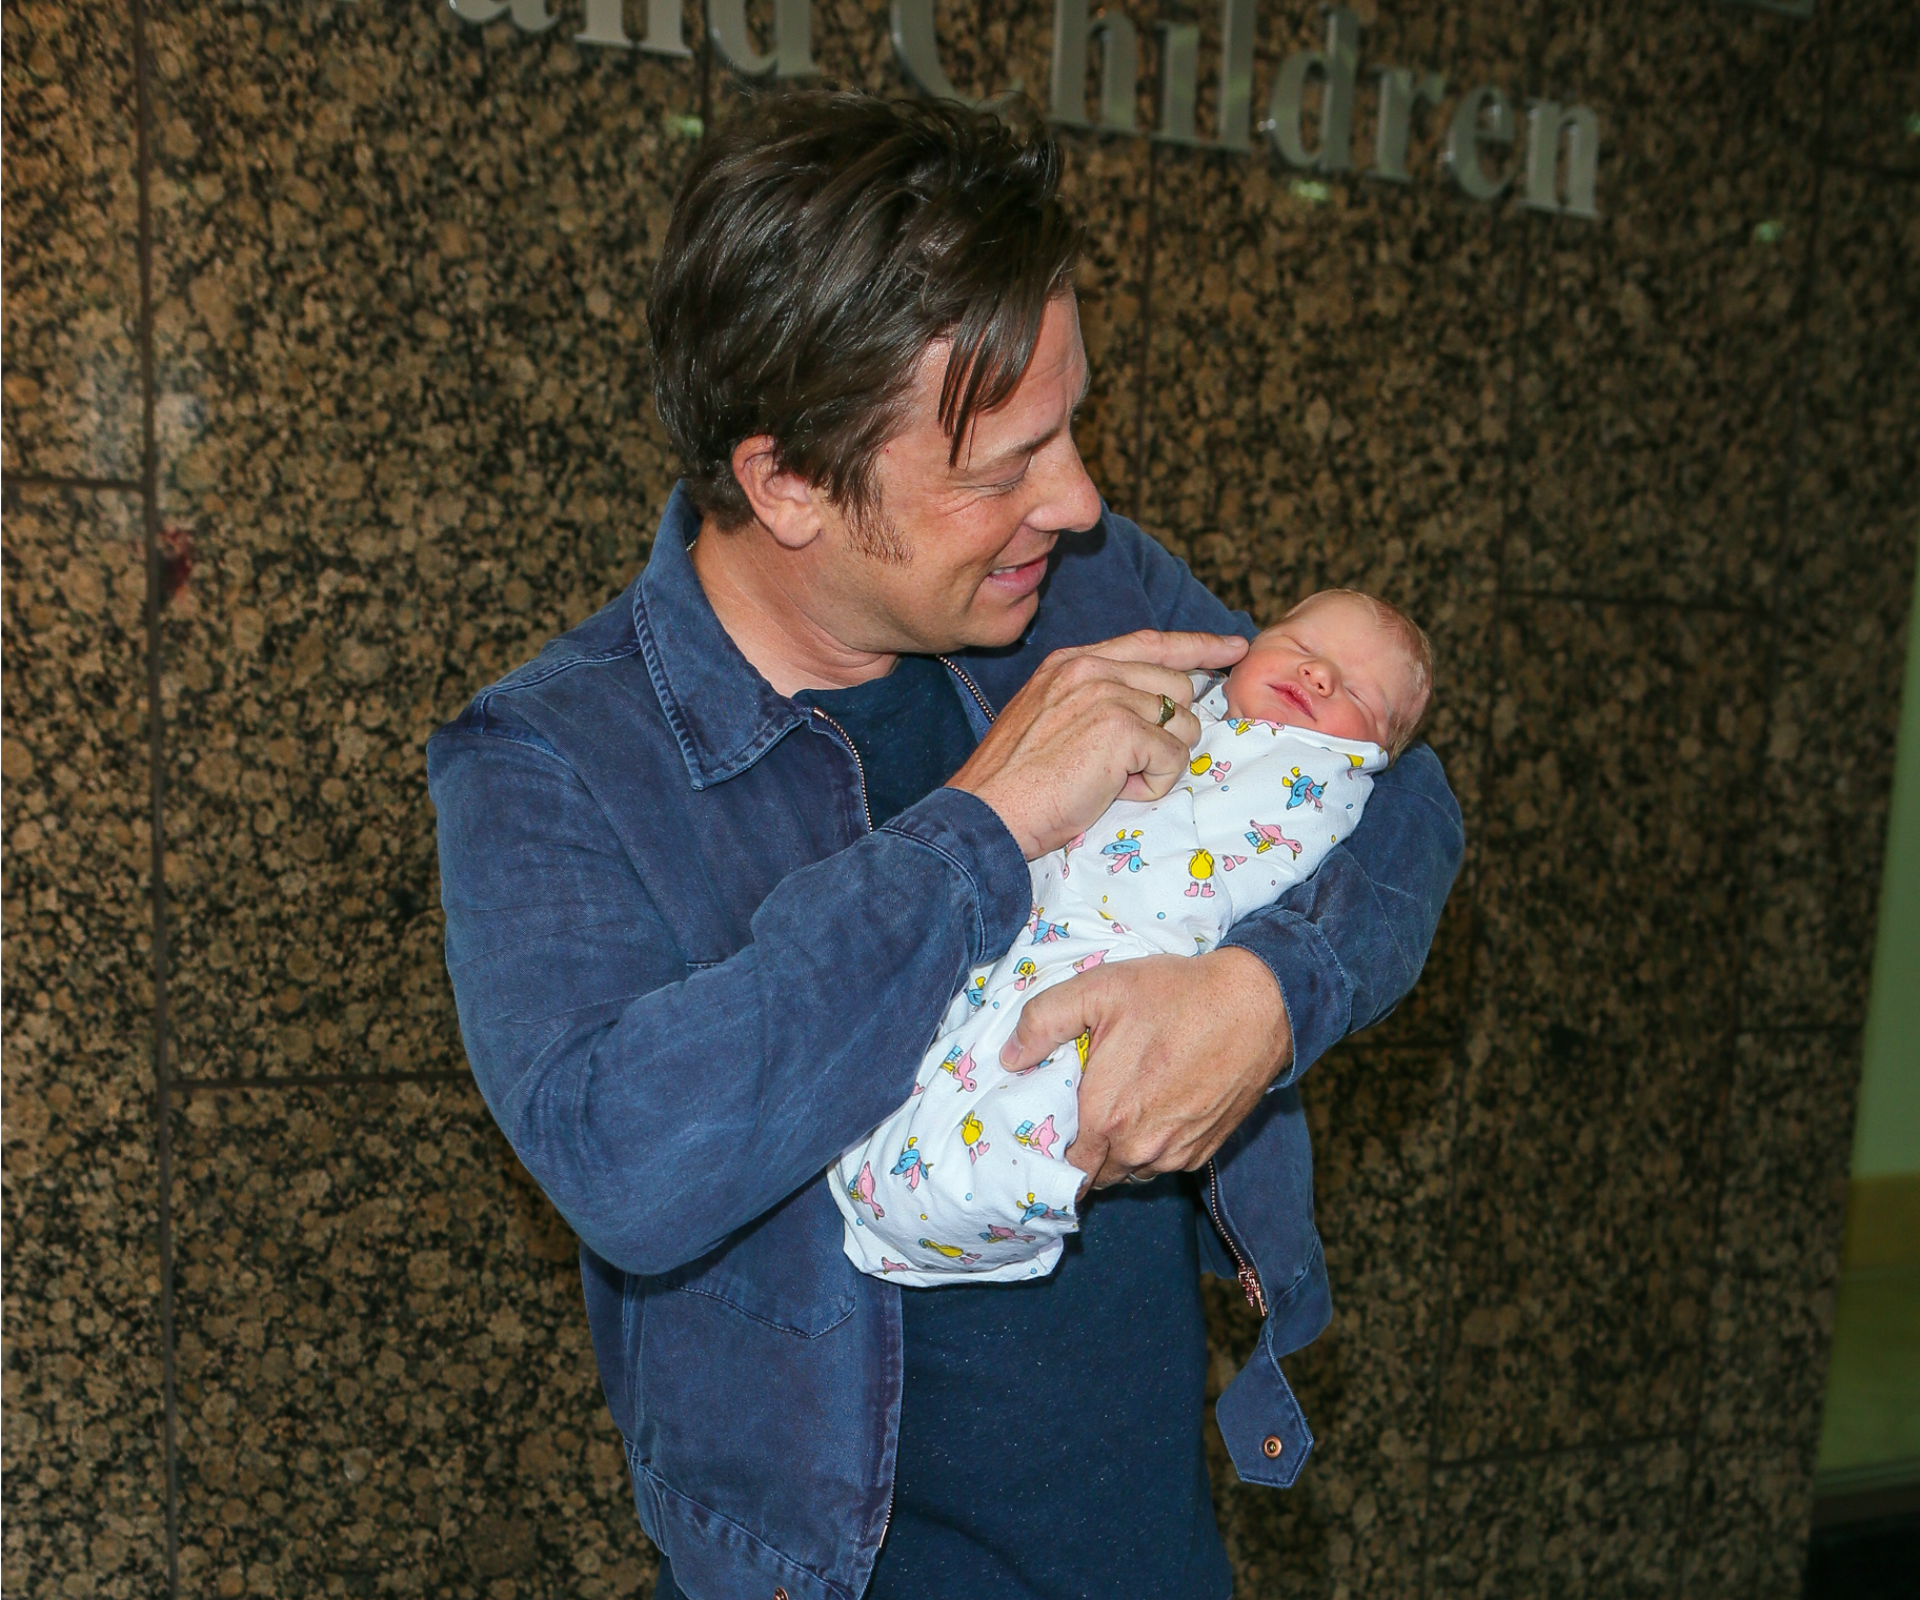 Jamie Oliver shares first outing with newborn baby